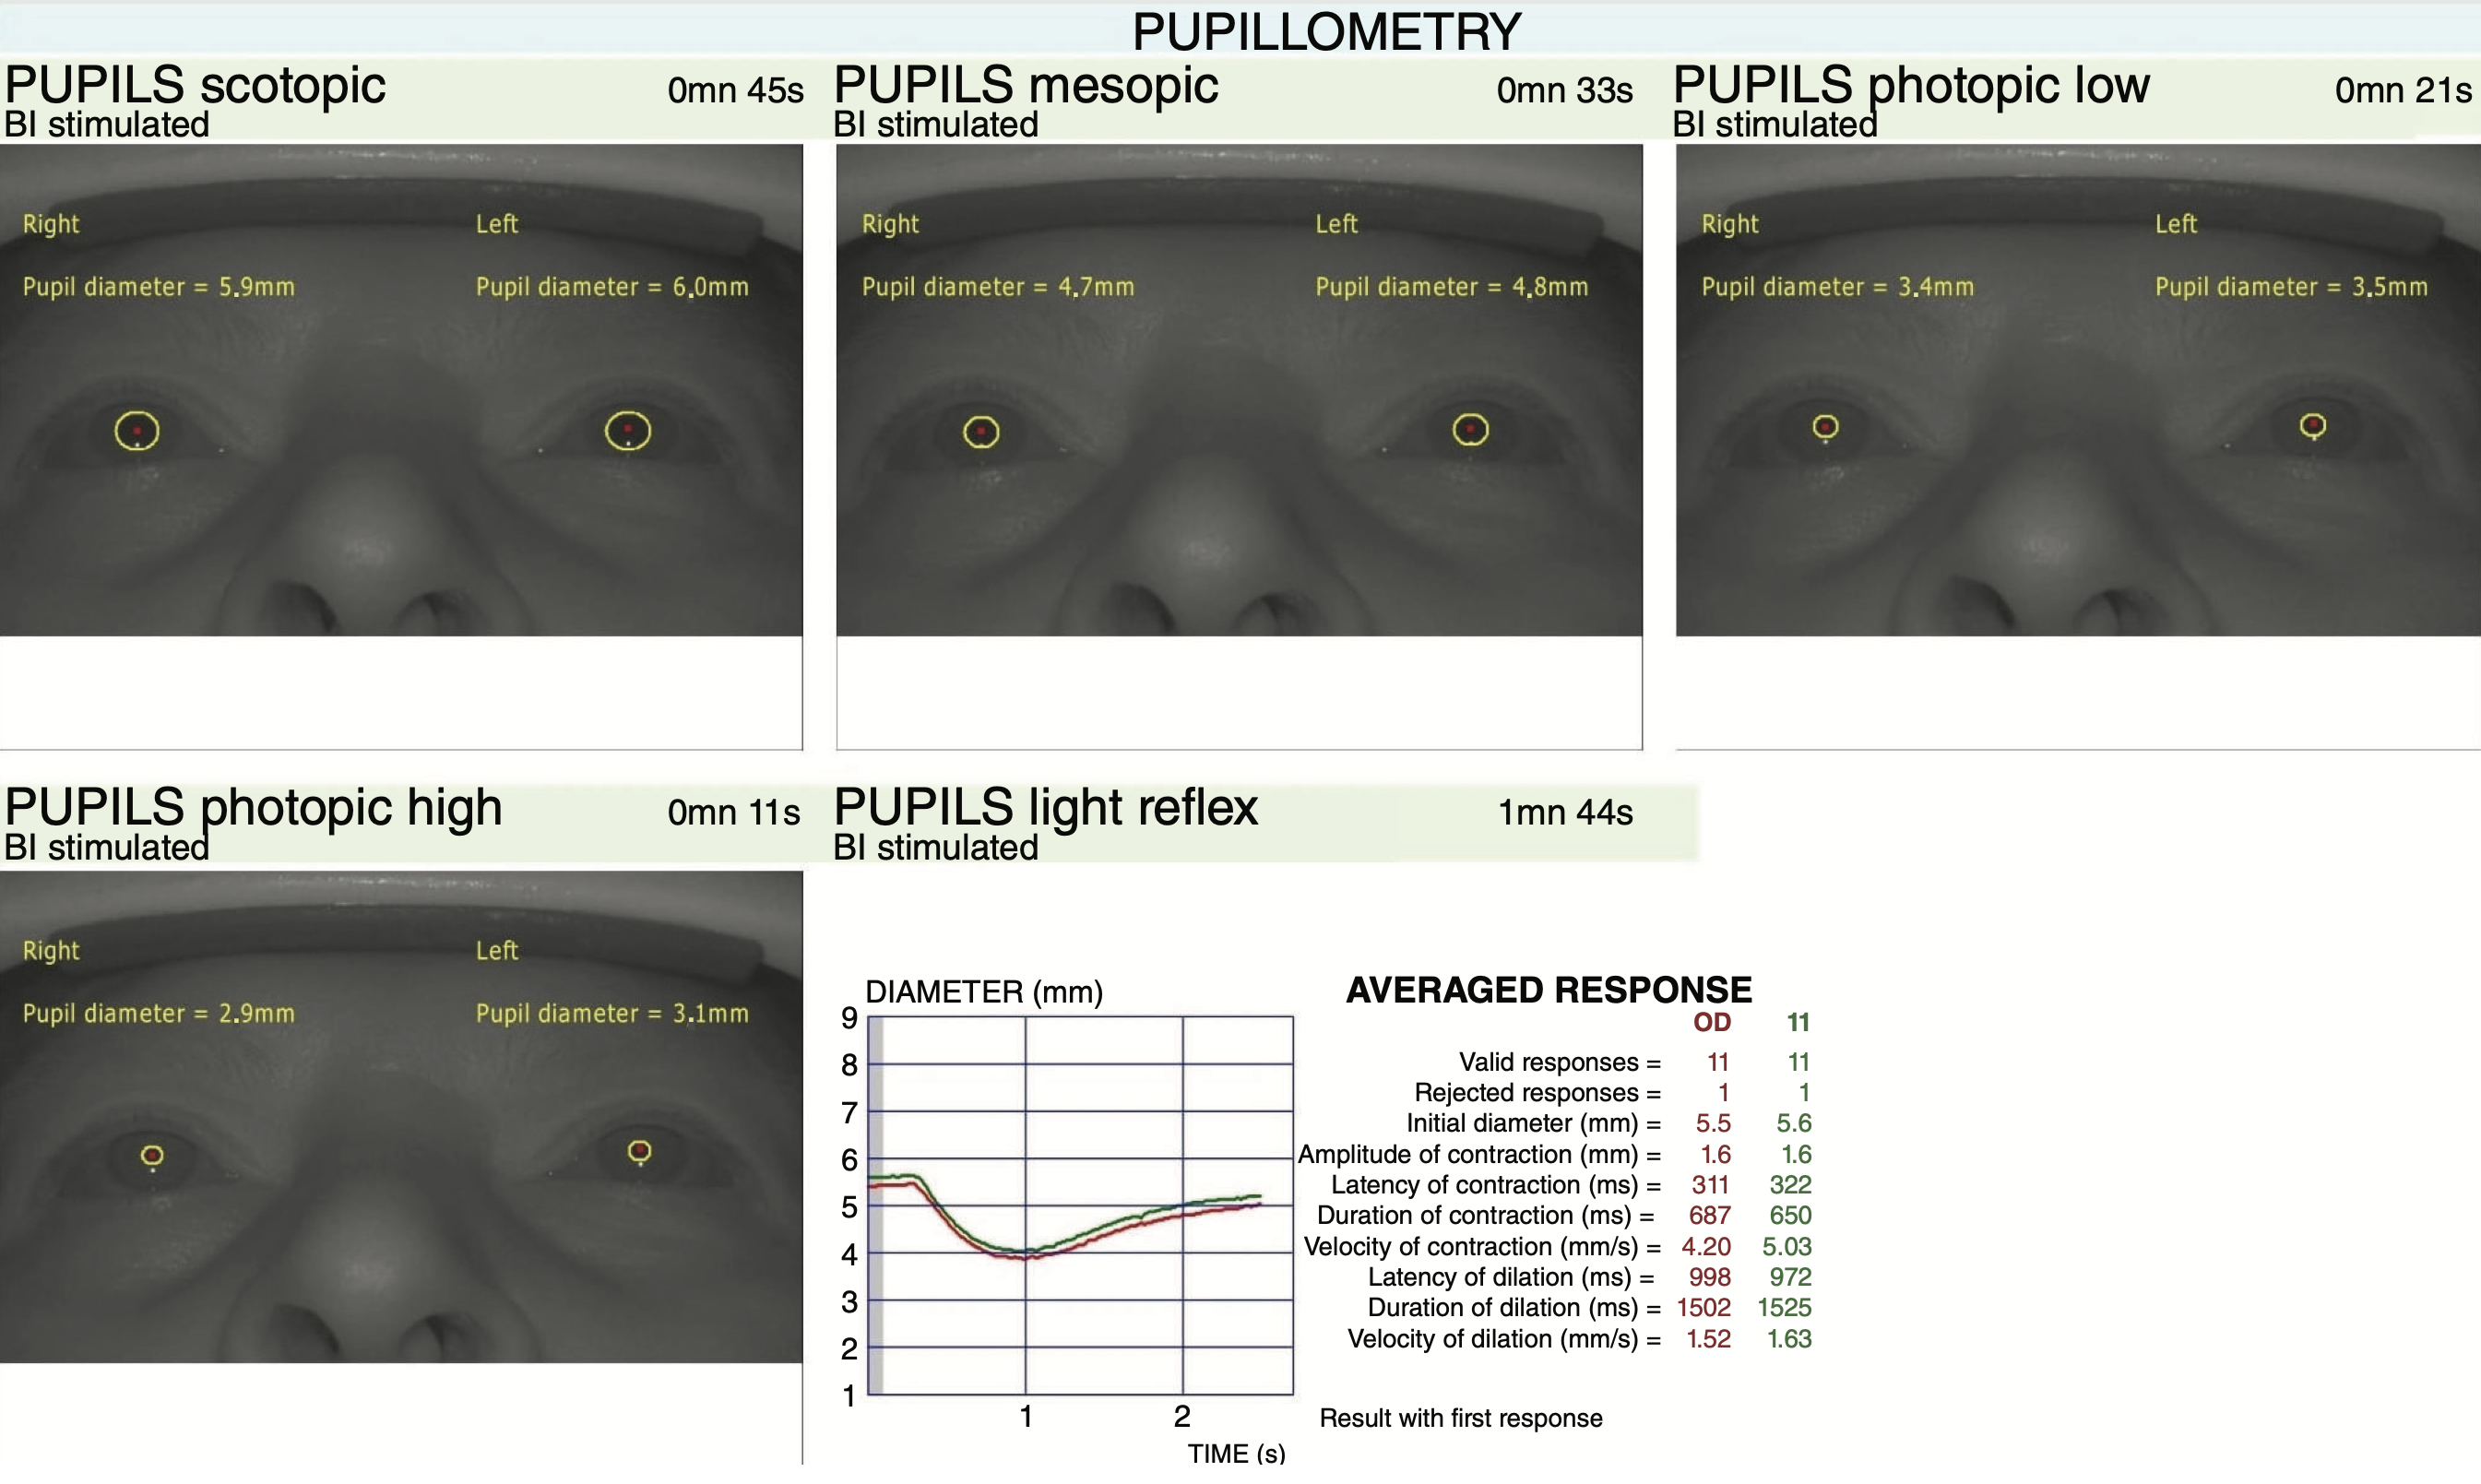 Automated pupillometry may prove a helpful diagnostic tool for early-stage glaucoma detection. 